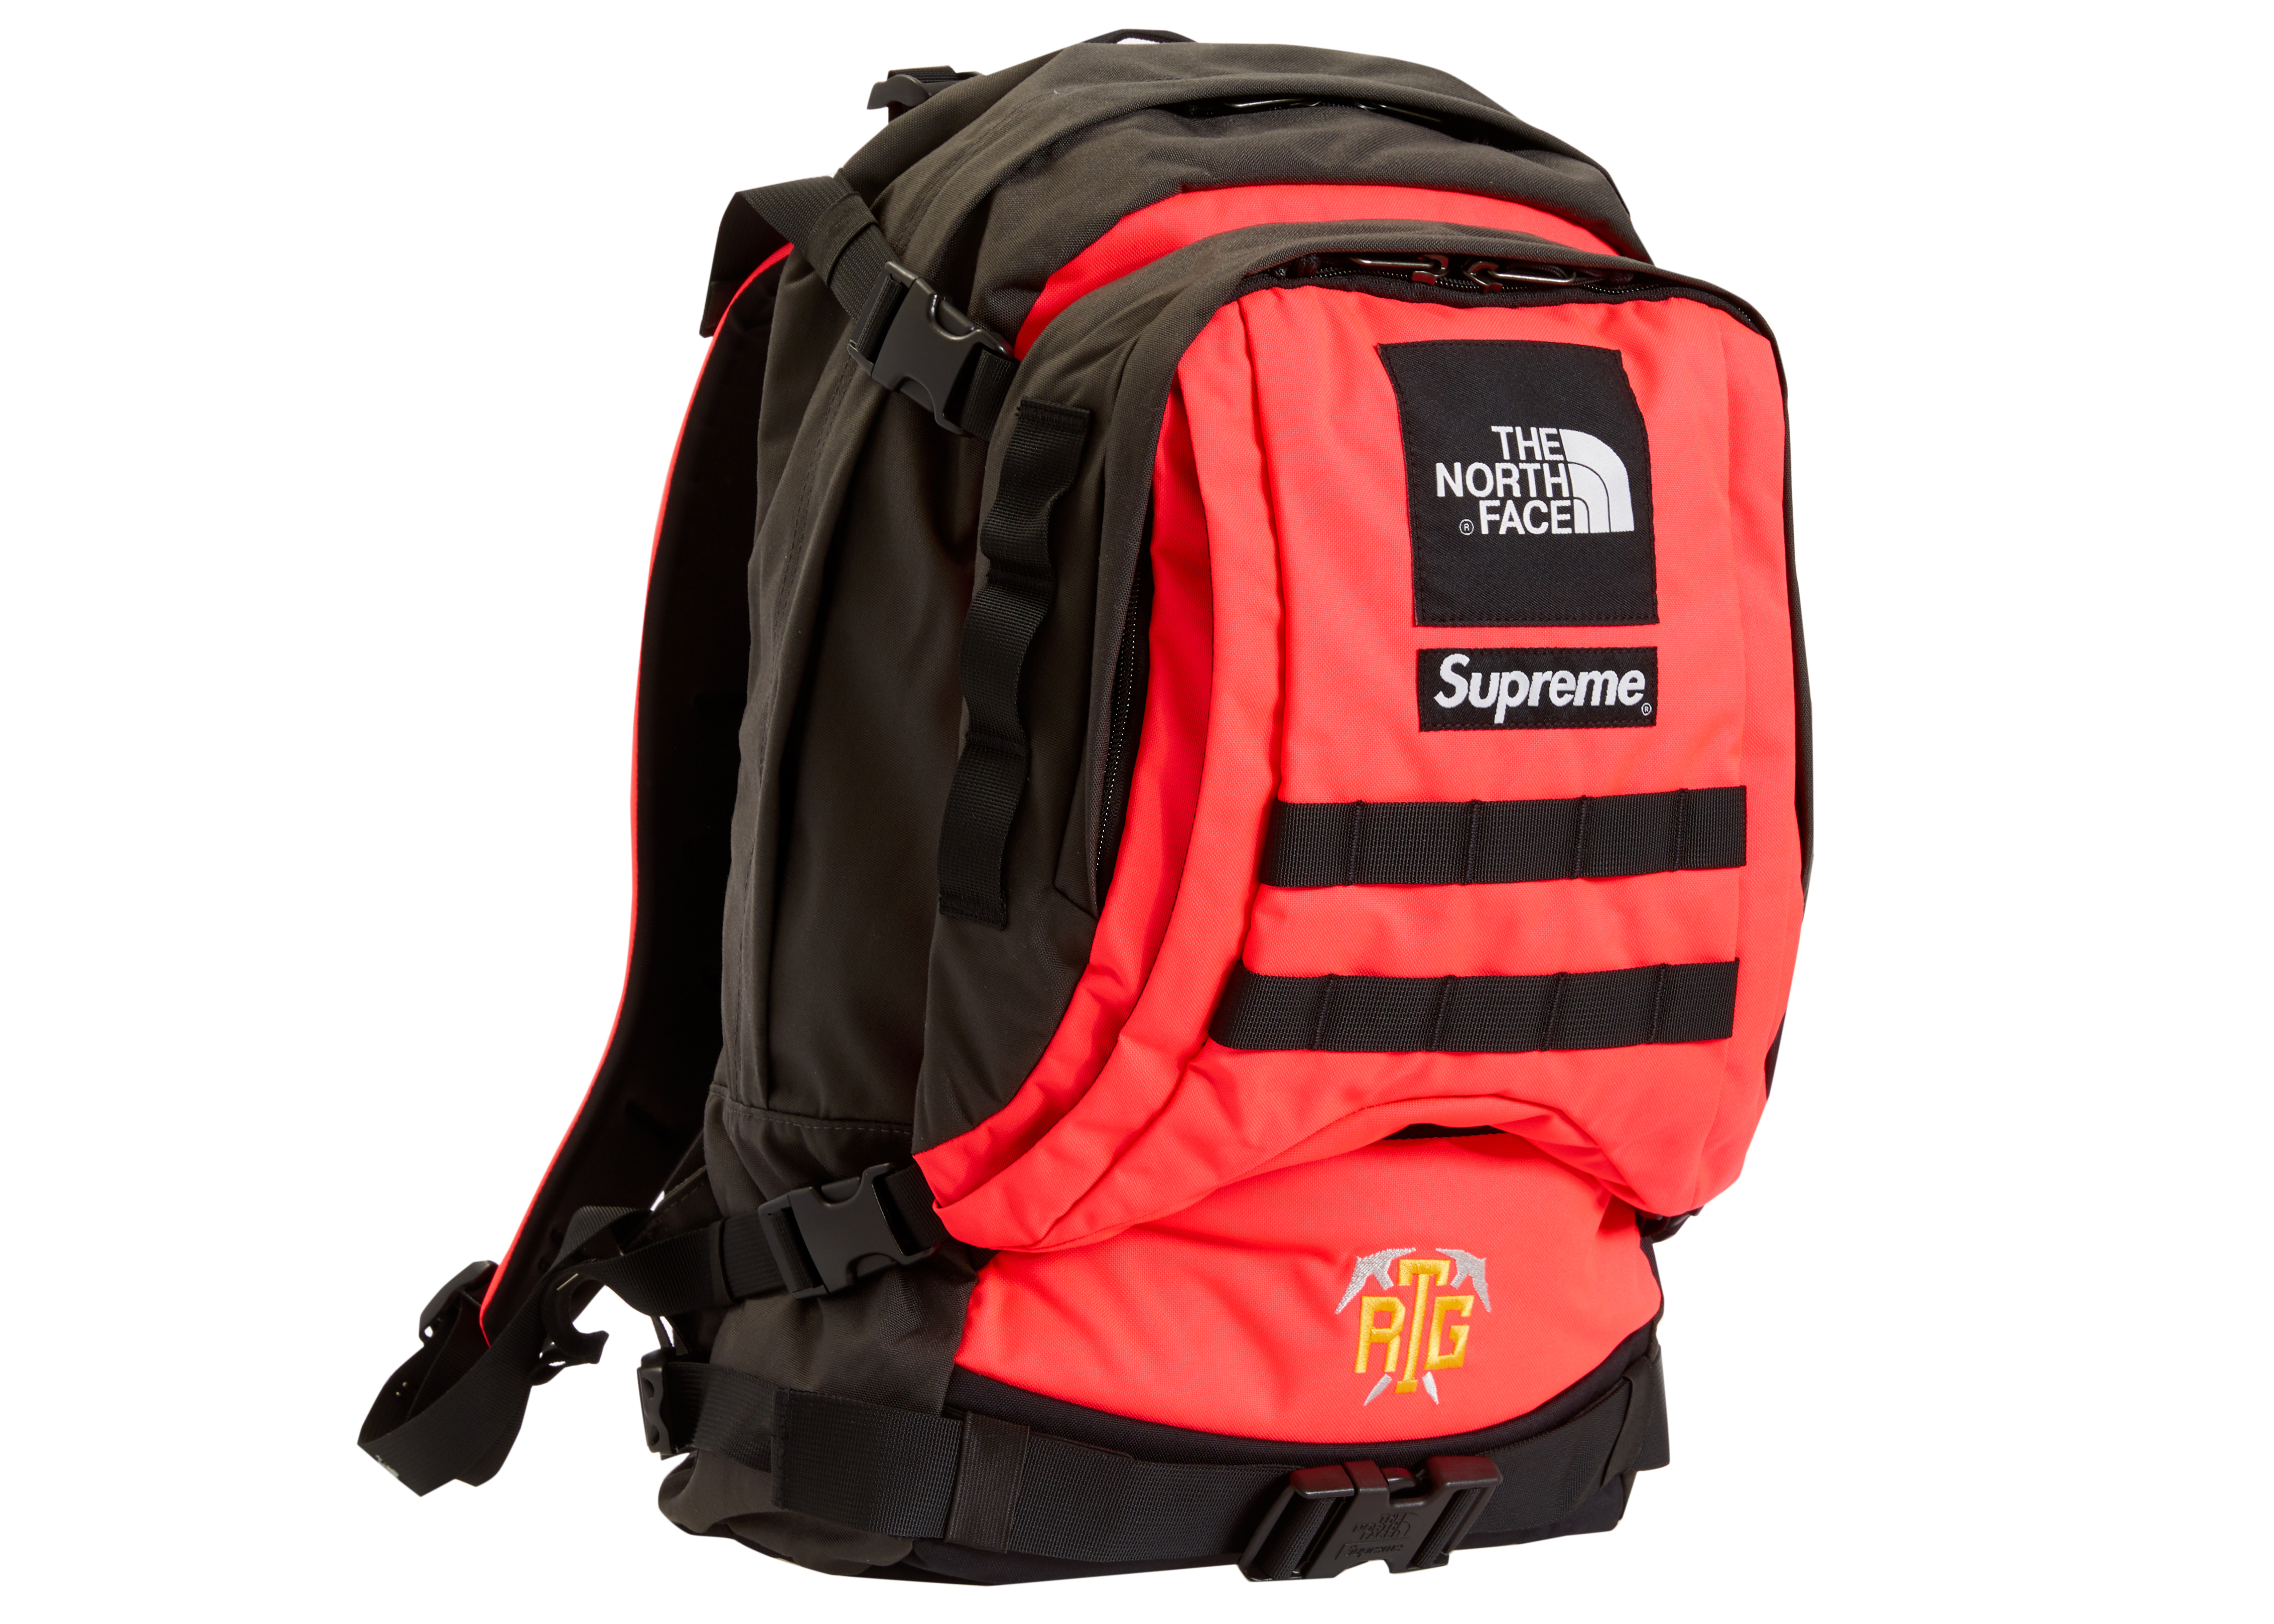 north face red backpack